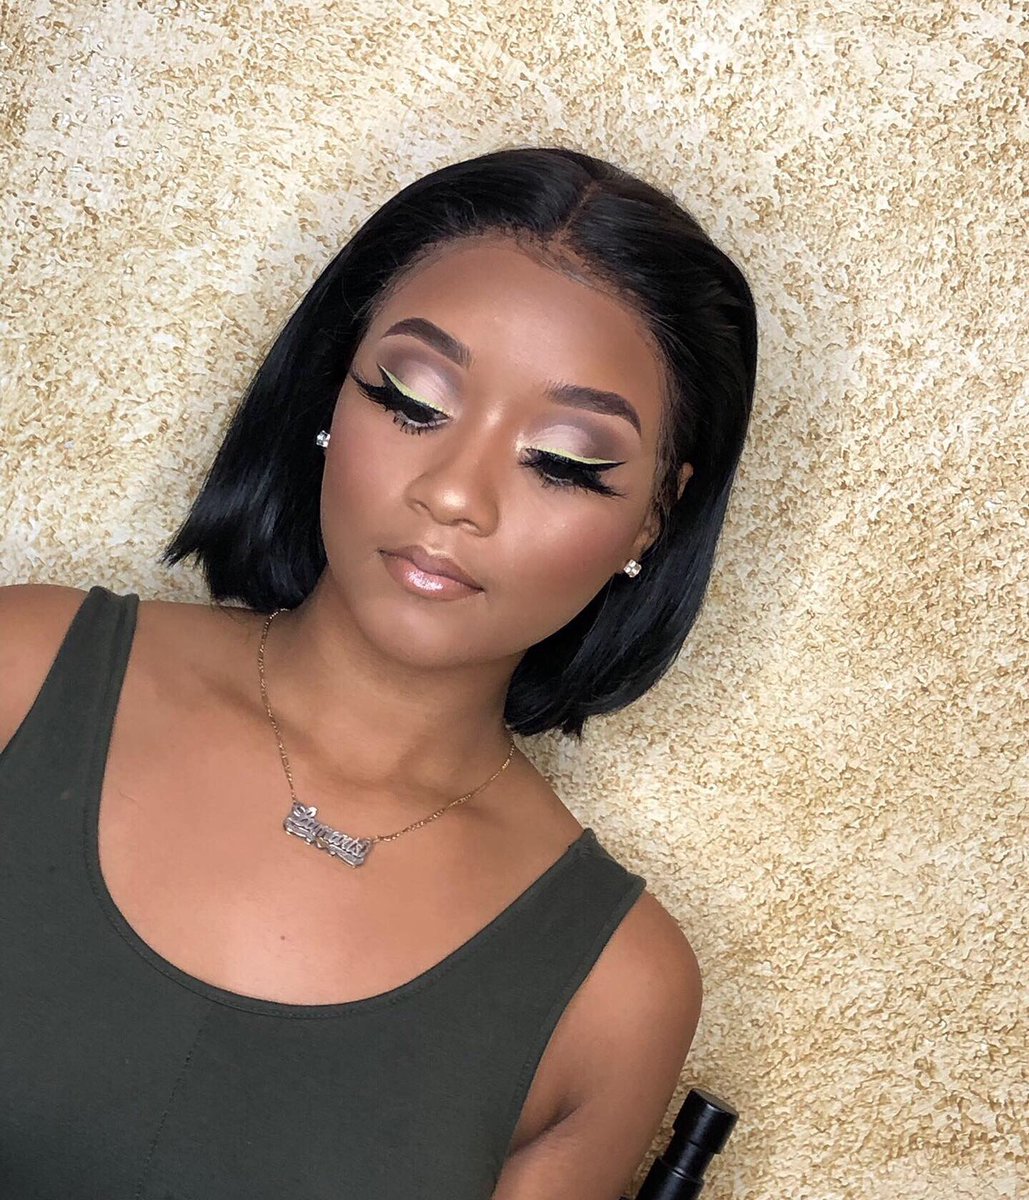 Hey y’all, I’m a certified makeup artist in Broward/Miami area and would love to get the word out on twitter 💕 My IG to book is: @nalani_mua #Miamimua #Browardmua #Miamimakeupartist #Browardmakeupartist